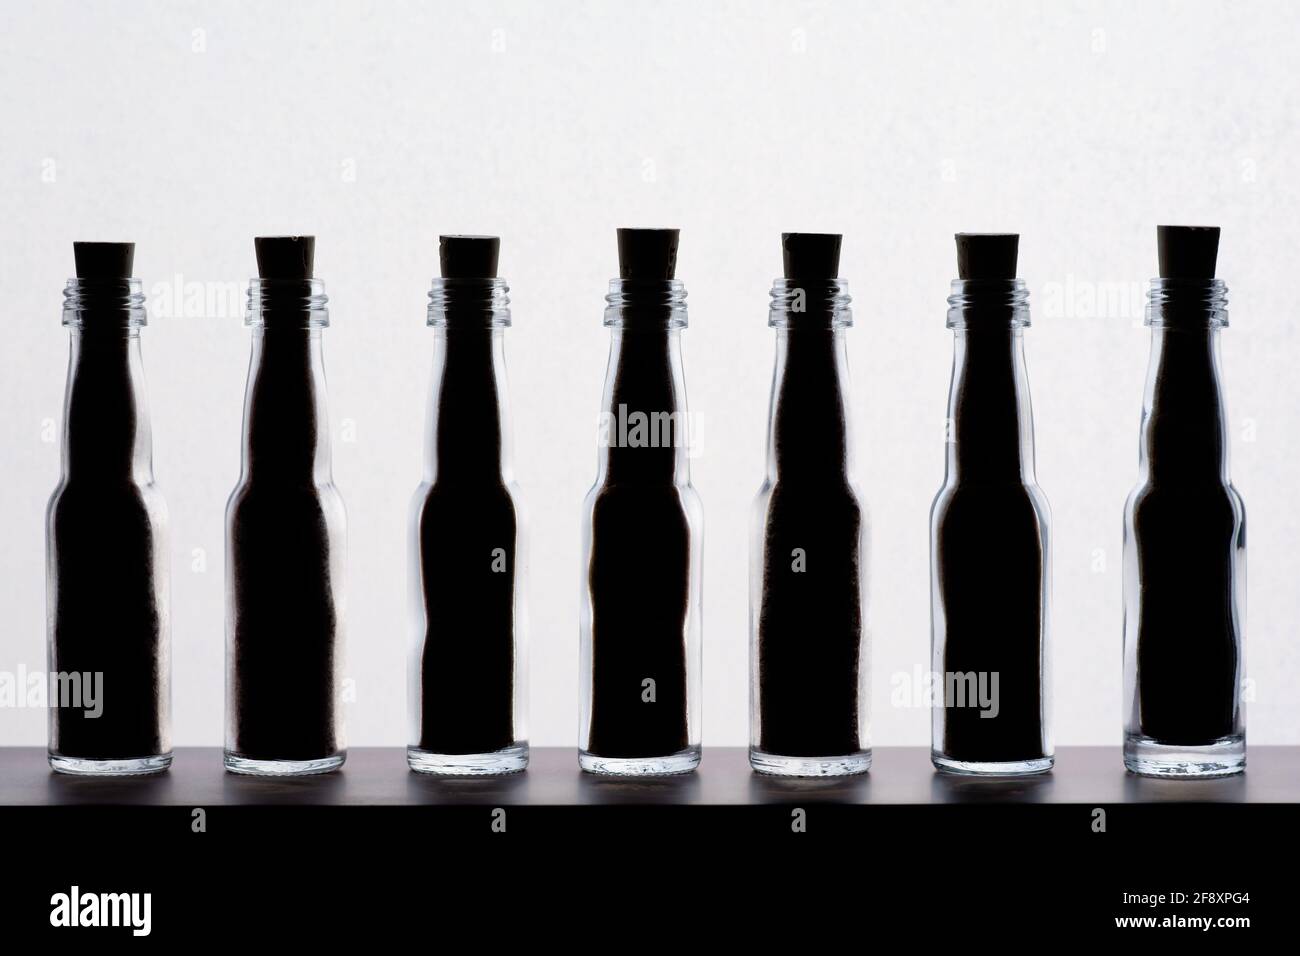 Seven small backlit glass bottles in a row, on white background. Flacons are filled with content to the top and sealed with cork stoppers. Stock Photo